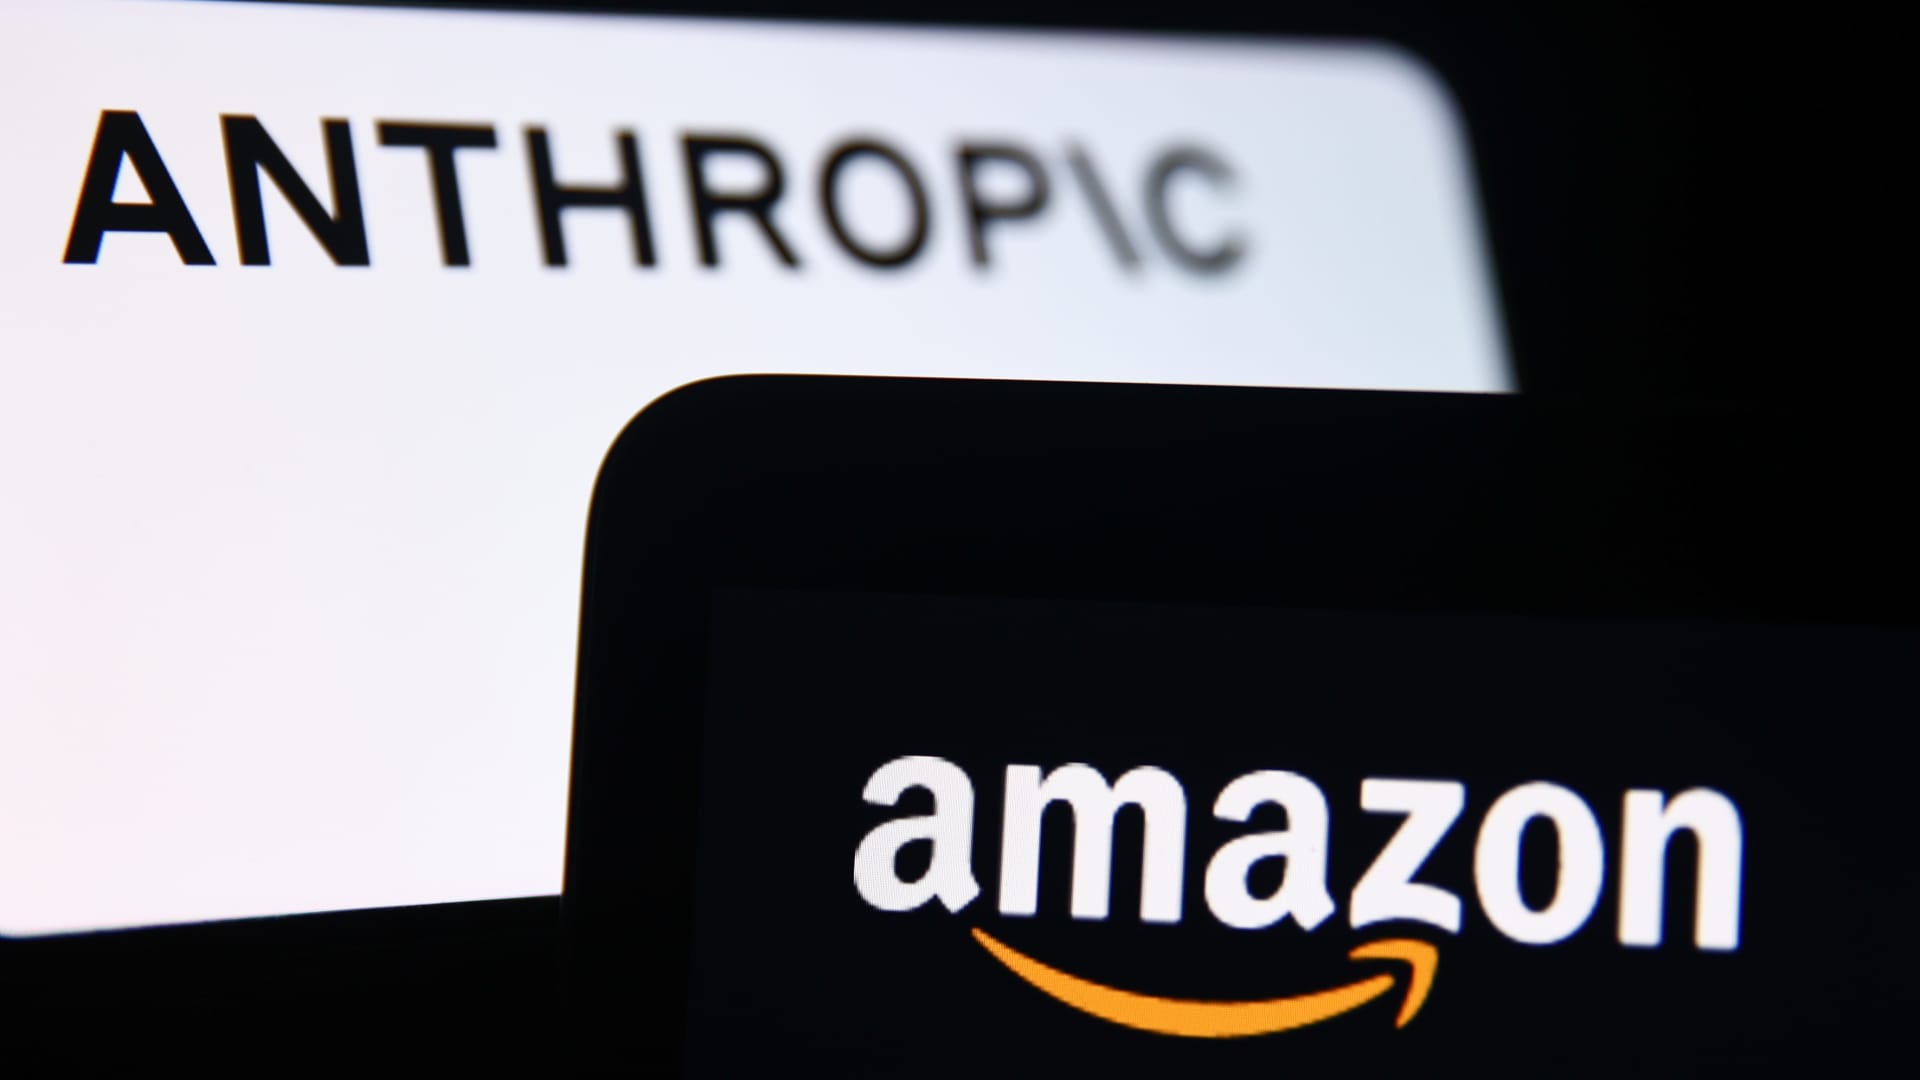 Amazon spends .75 billion on AI startup Anthropic in its largest venture investment yet